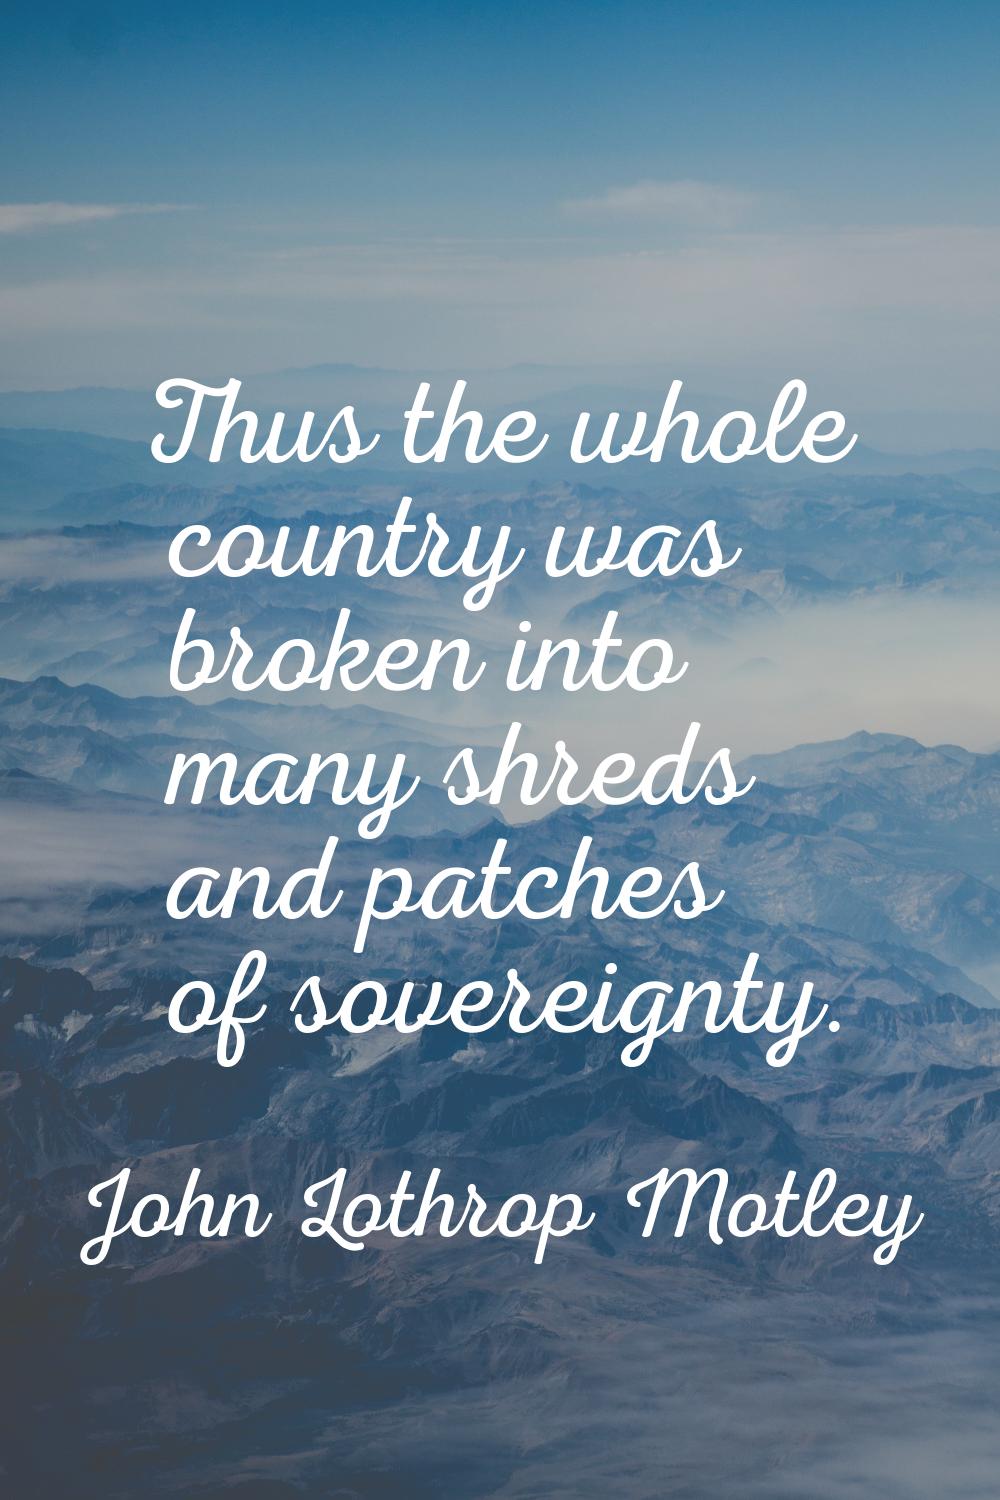 Thus the whole country was broken into many shreds and patches of sovereignty.